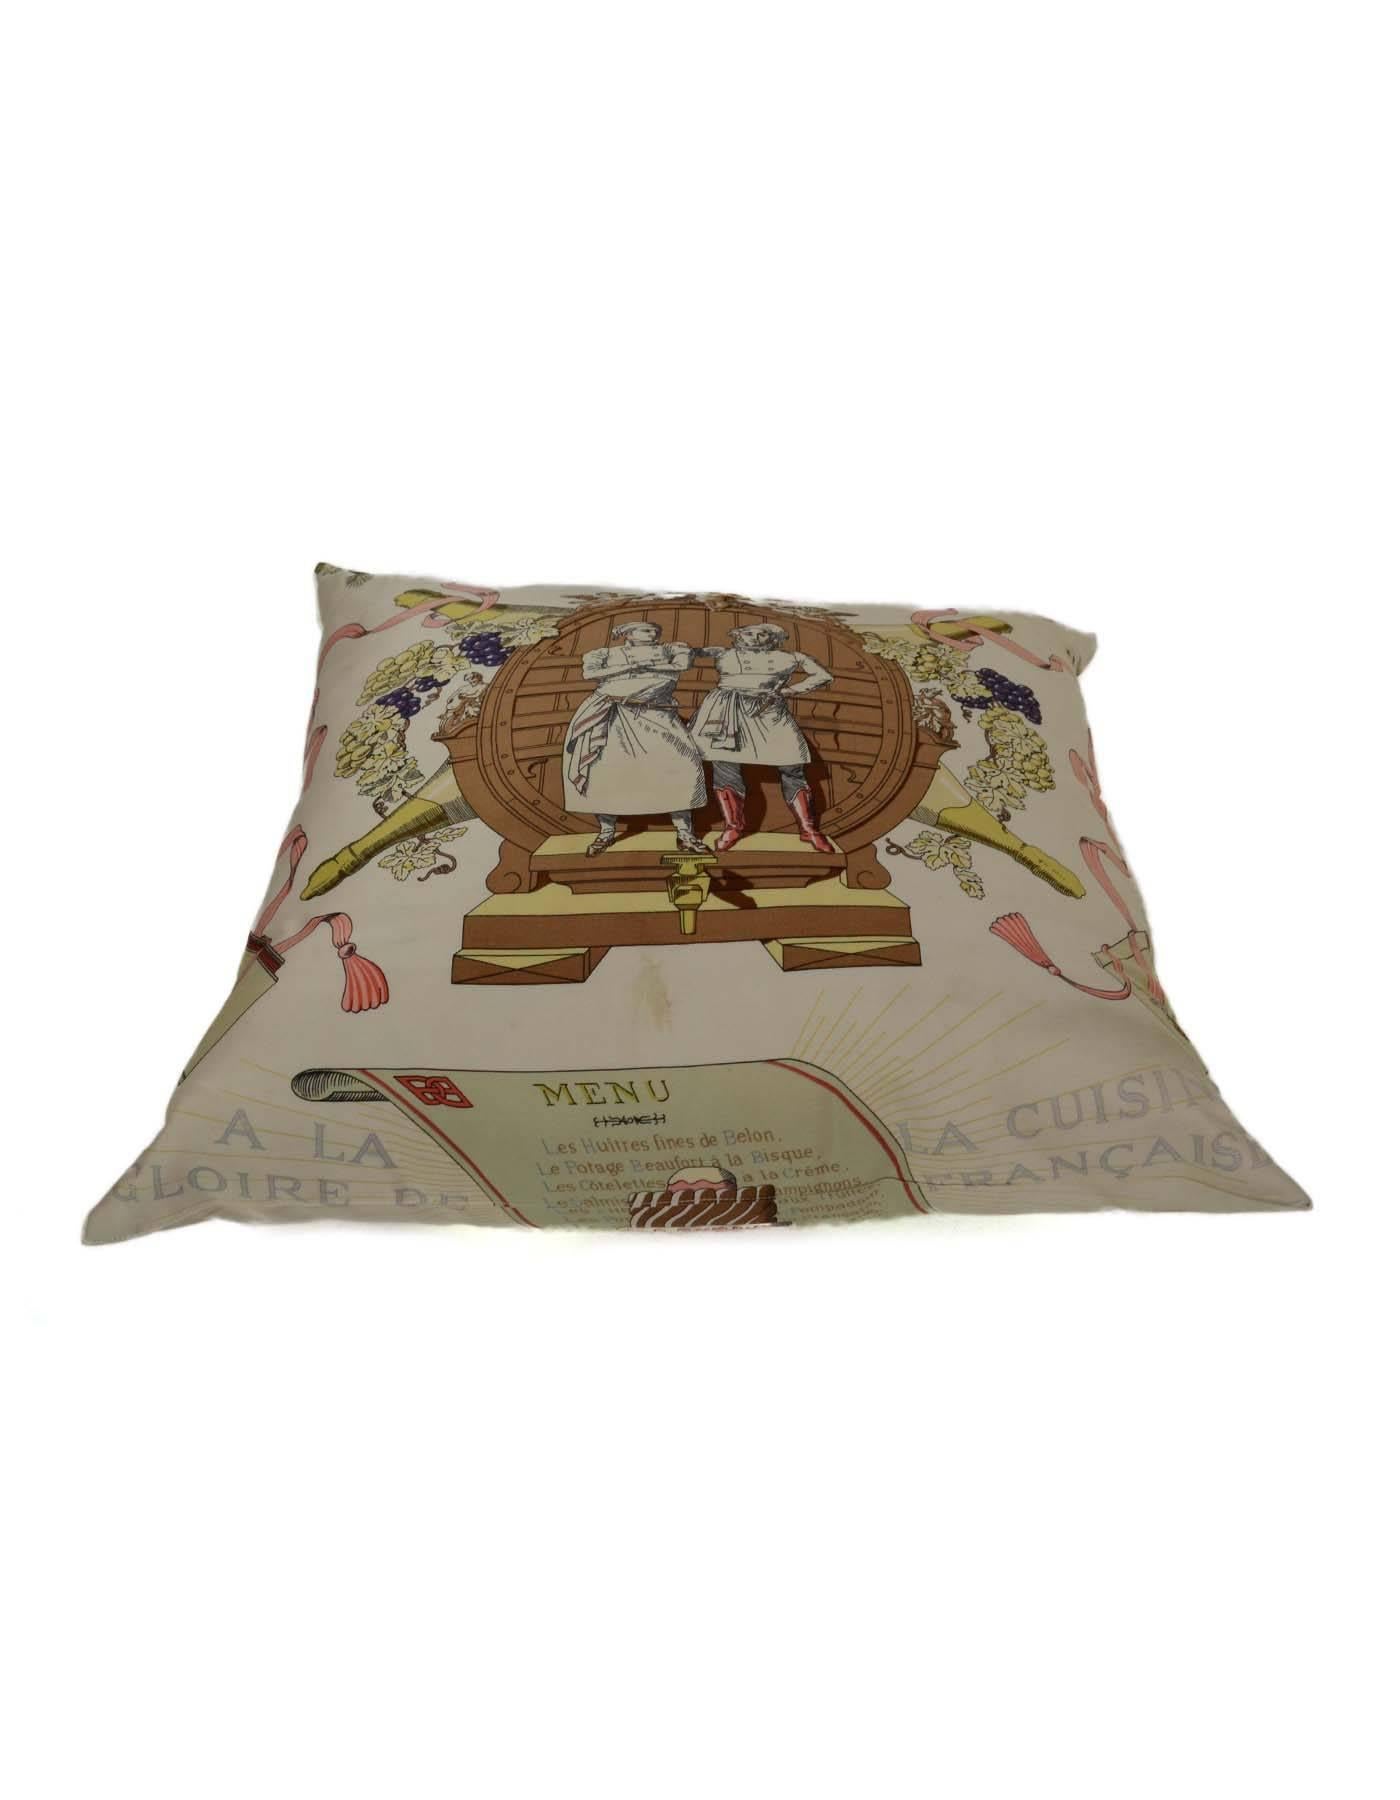 Hermes Vintage Cream & Multi-Colored Silk Pillow
Features two french chefs on front of pillow
Year of Production: Circa 1970's
Color: Cream, brown, yellow, purple, and peach
Materials: Silk
Closure/Opening: Zipper
Overall Condition: Good